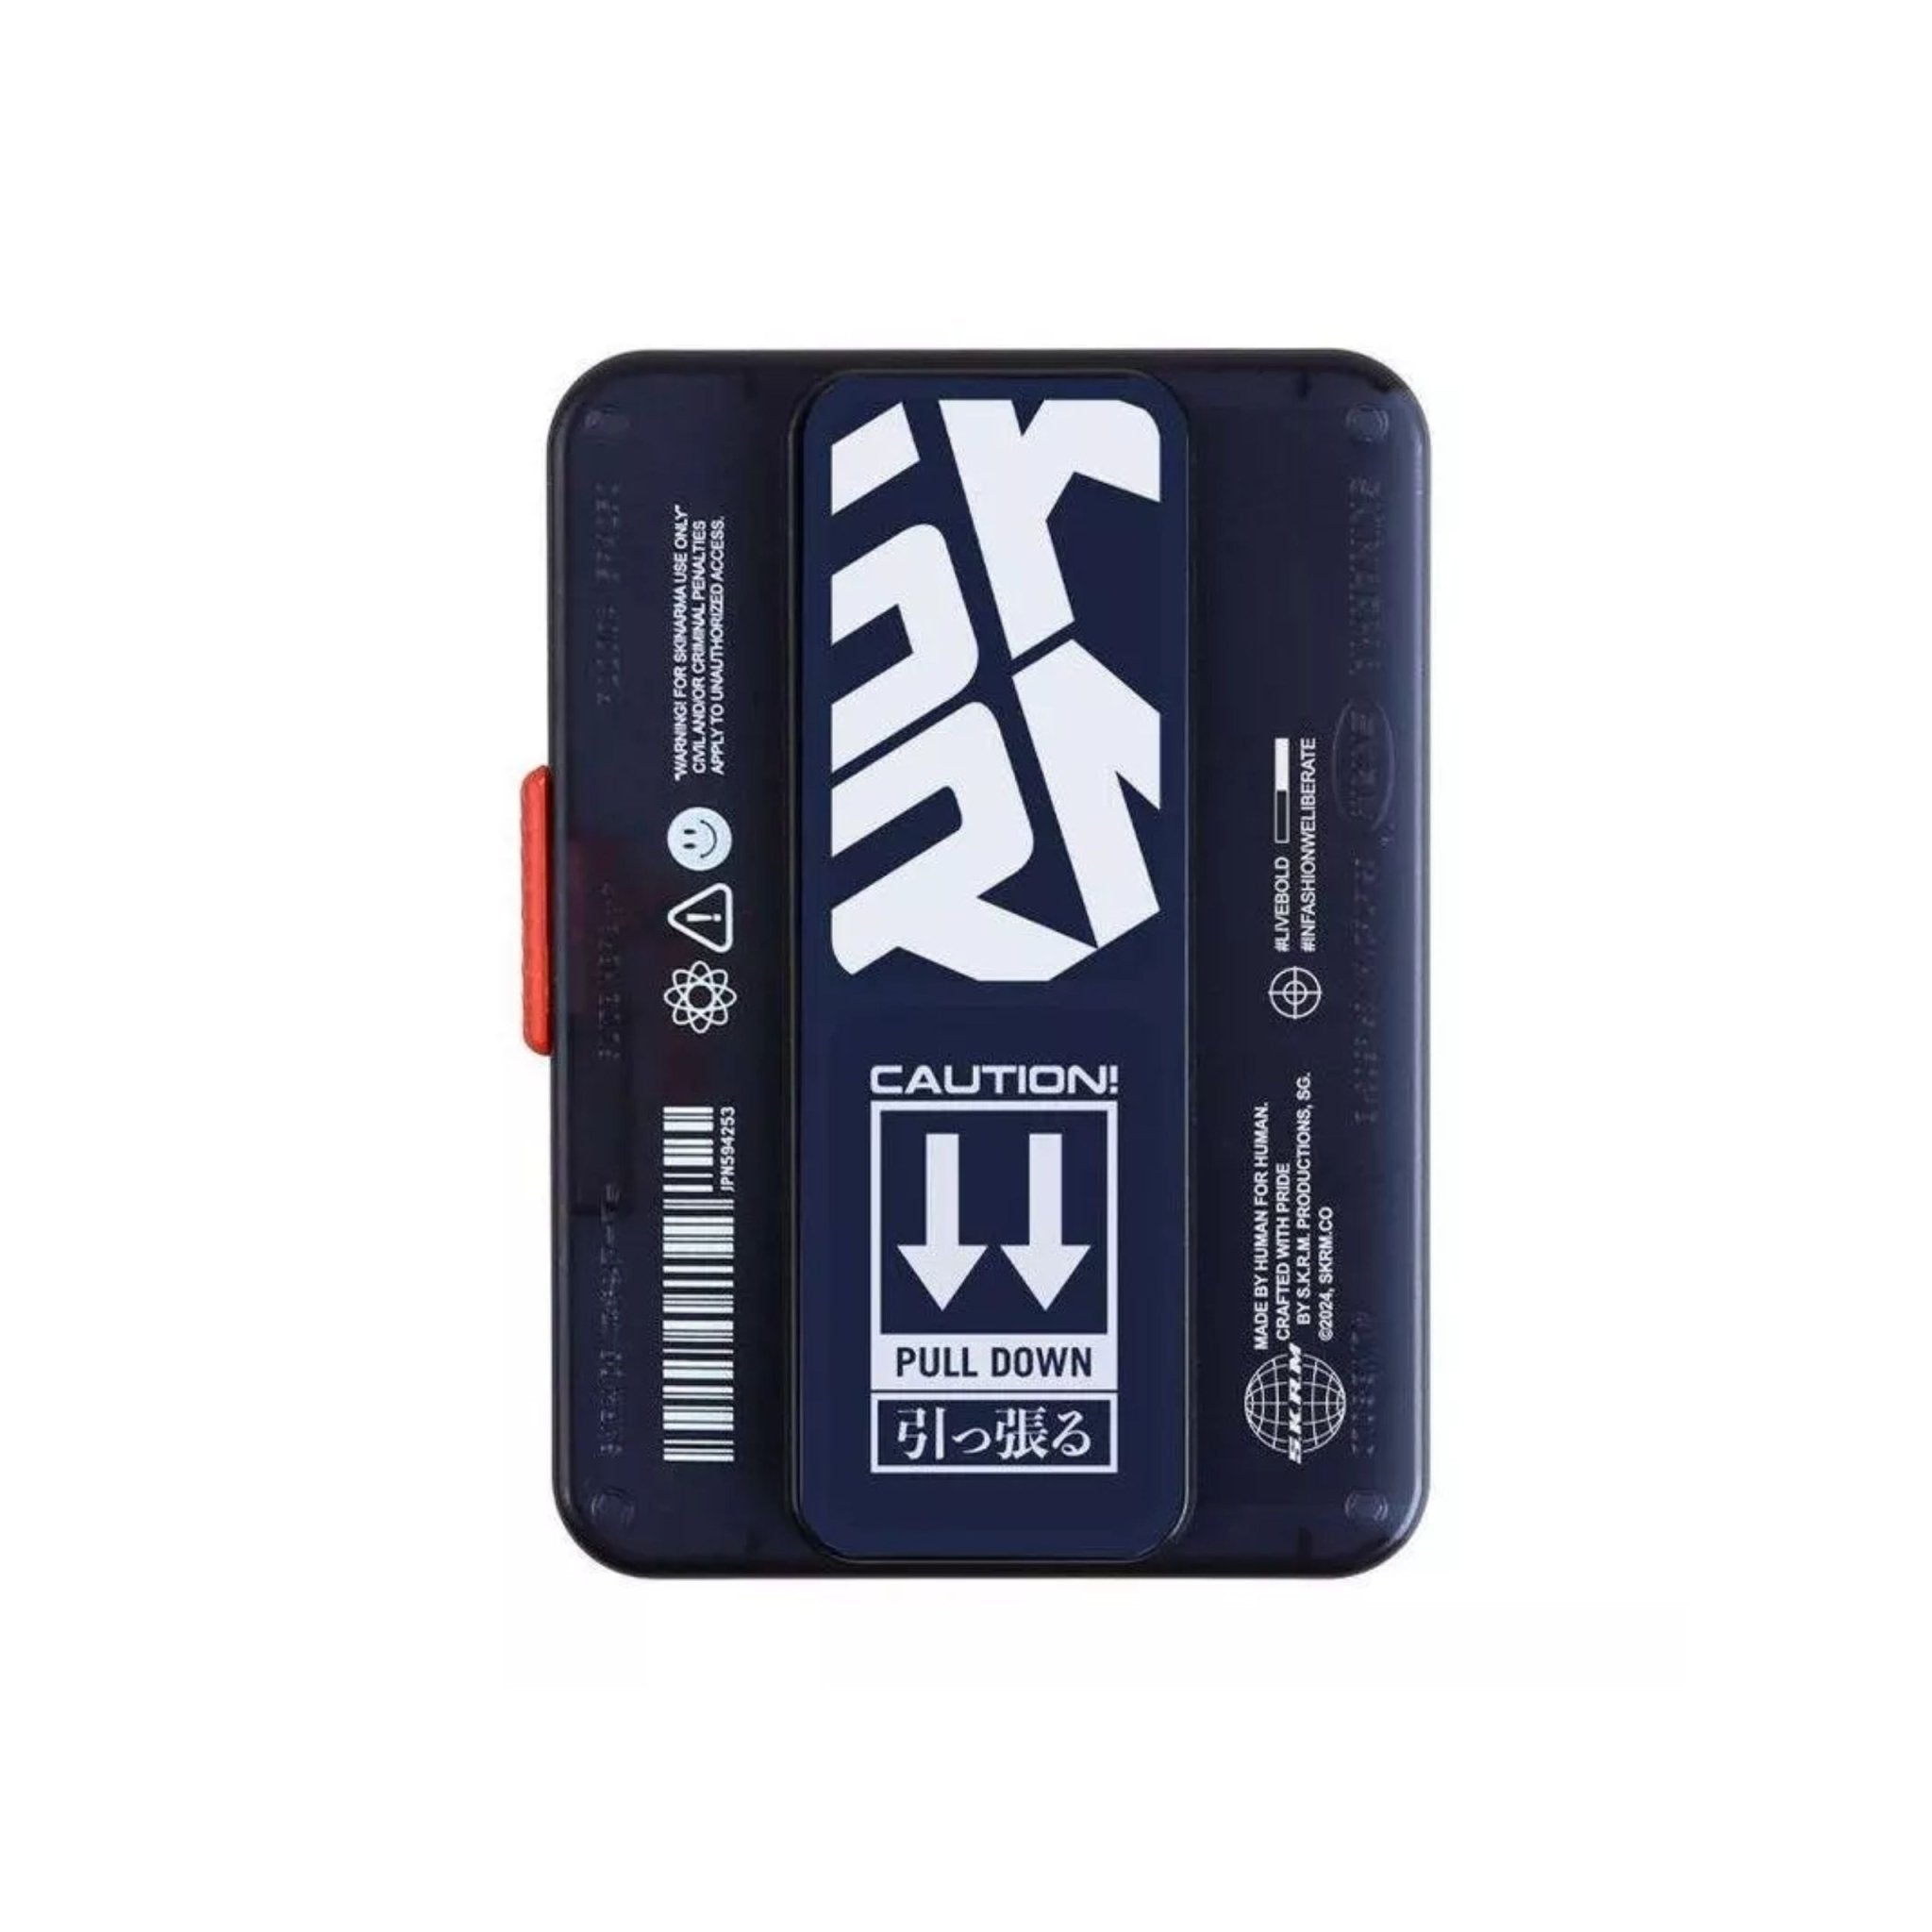 Skinarma Magnetic Cardholder Case with GripStand PHAZE - Blue